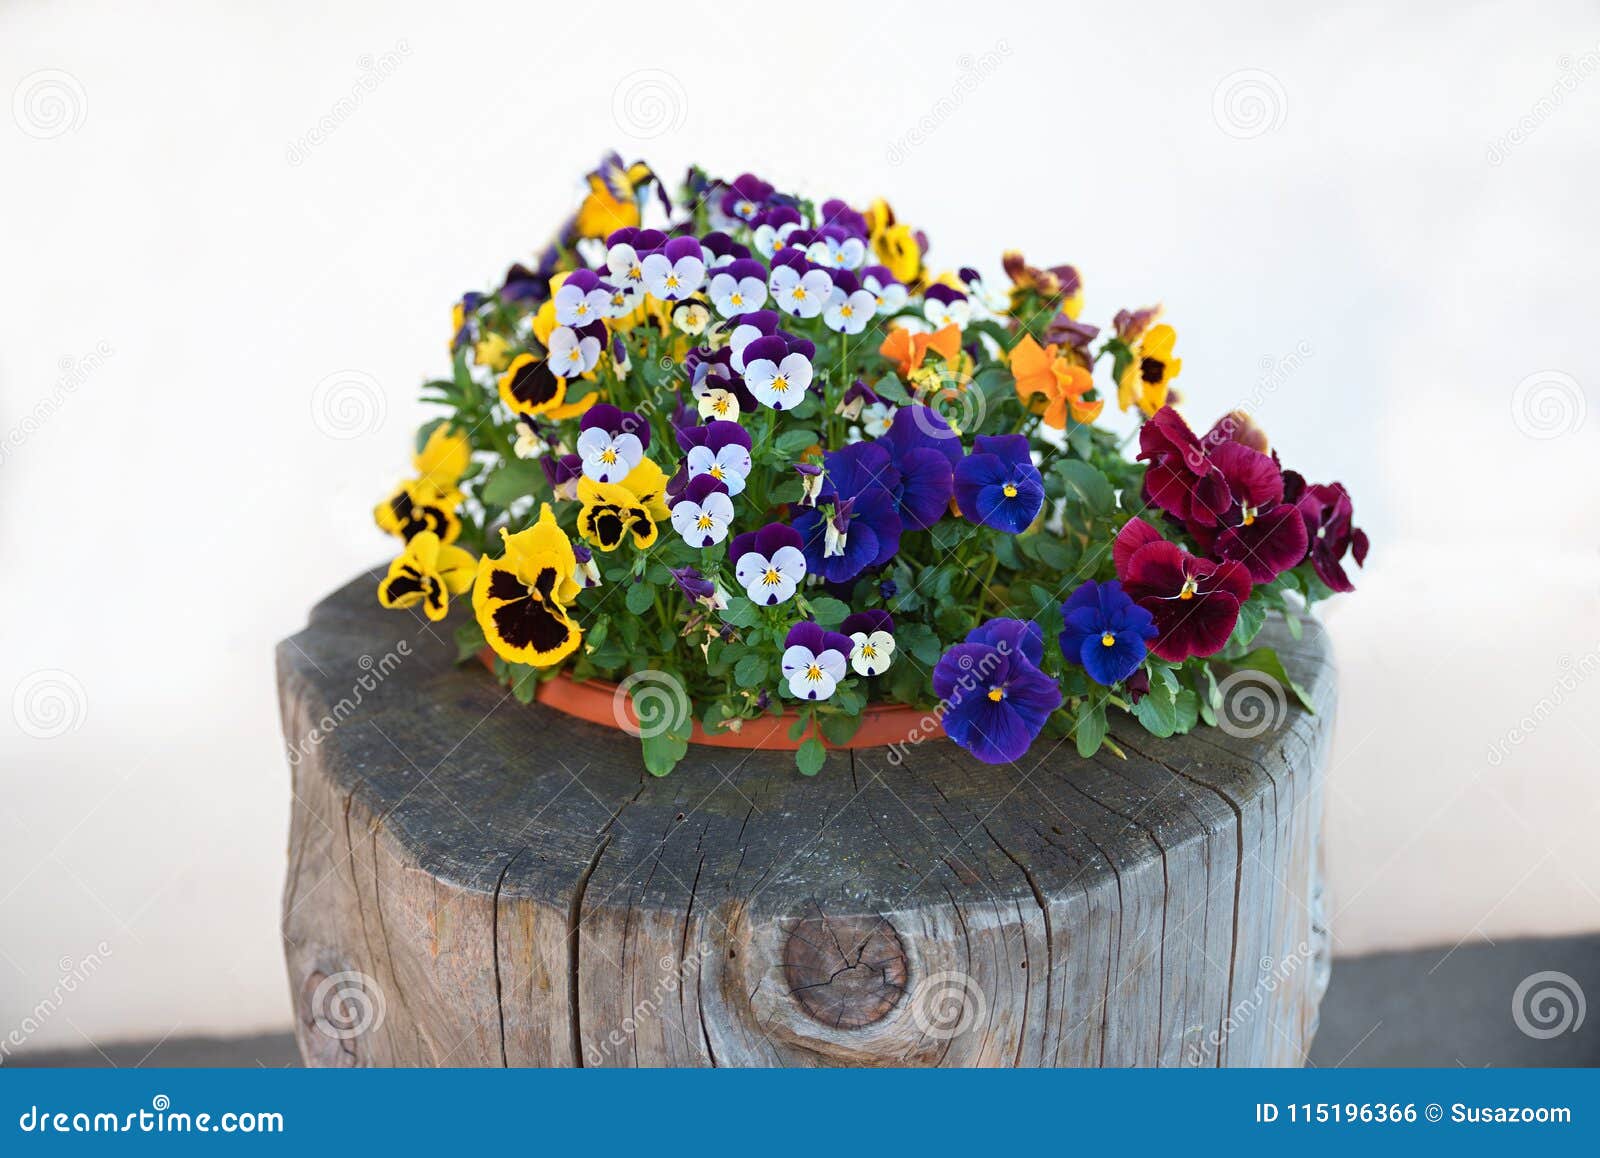 plate with mixed pansy flowers